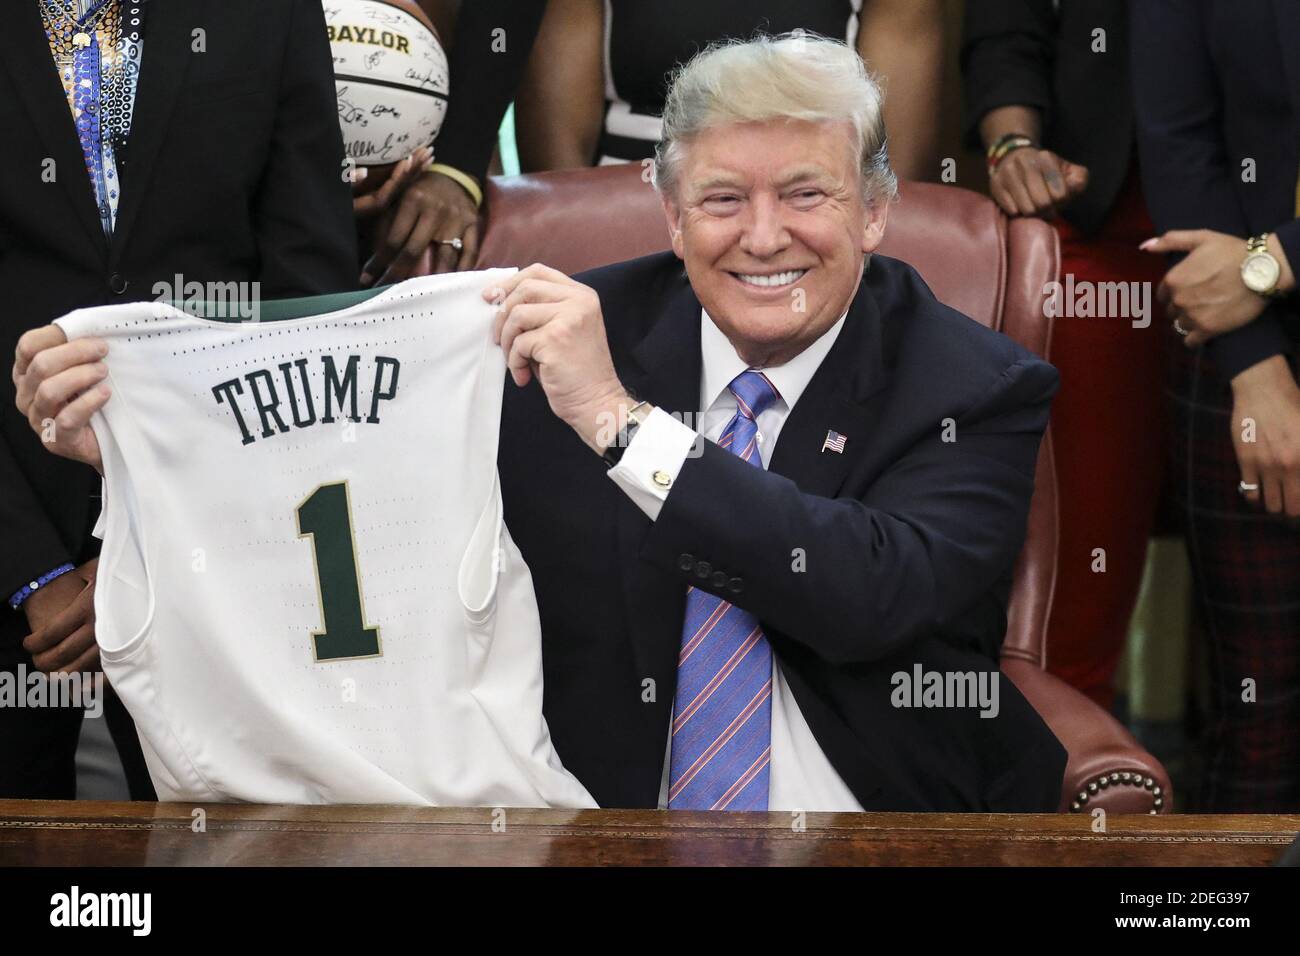 President Donald Trump holds a basketball jersey with his name on it from  head coach Kim Mulkey as he welcomes the 2019 NCAA Division I WomenâÂ€Â™s  Basketball National Champions, Baylor Lady Bears